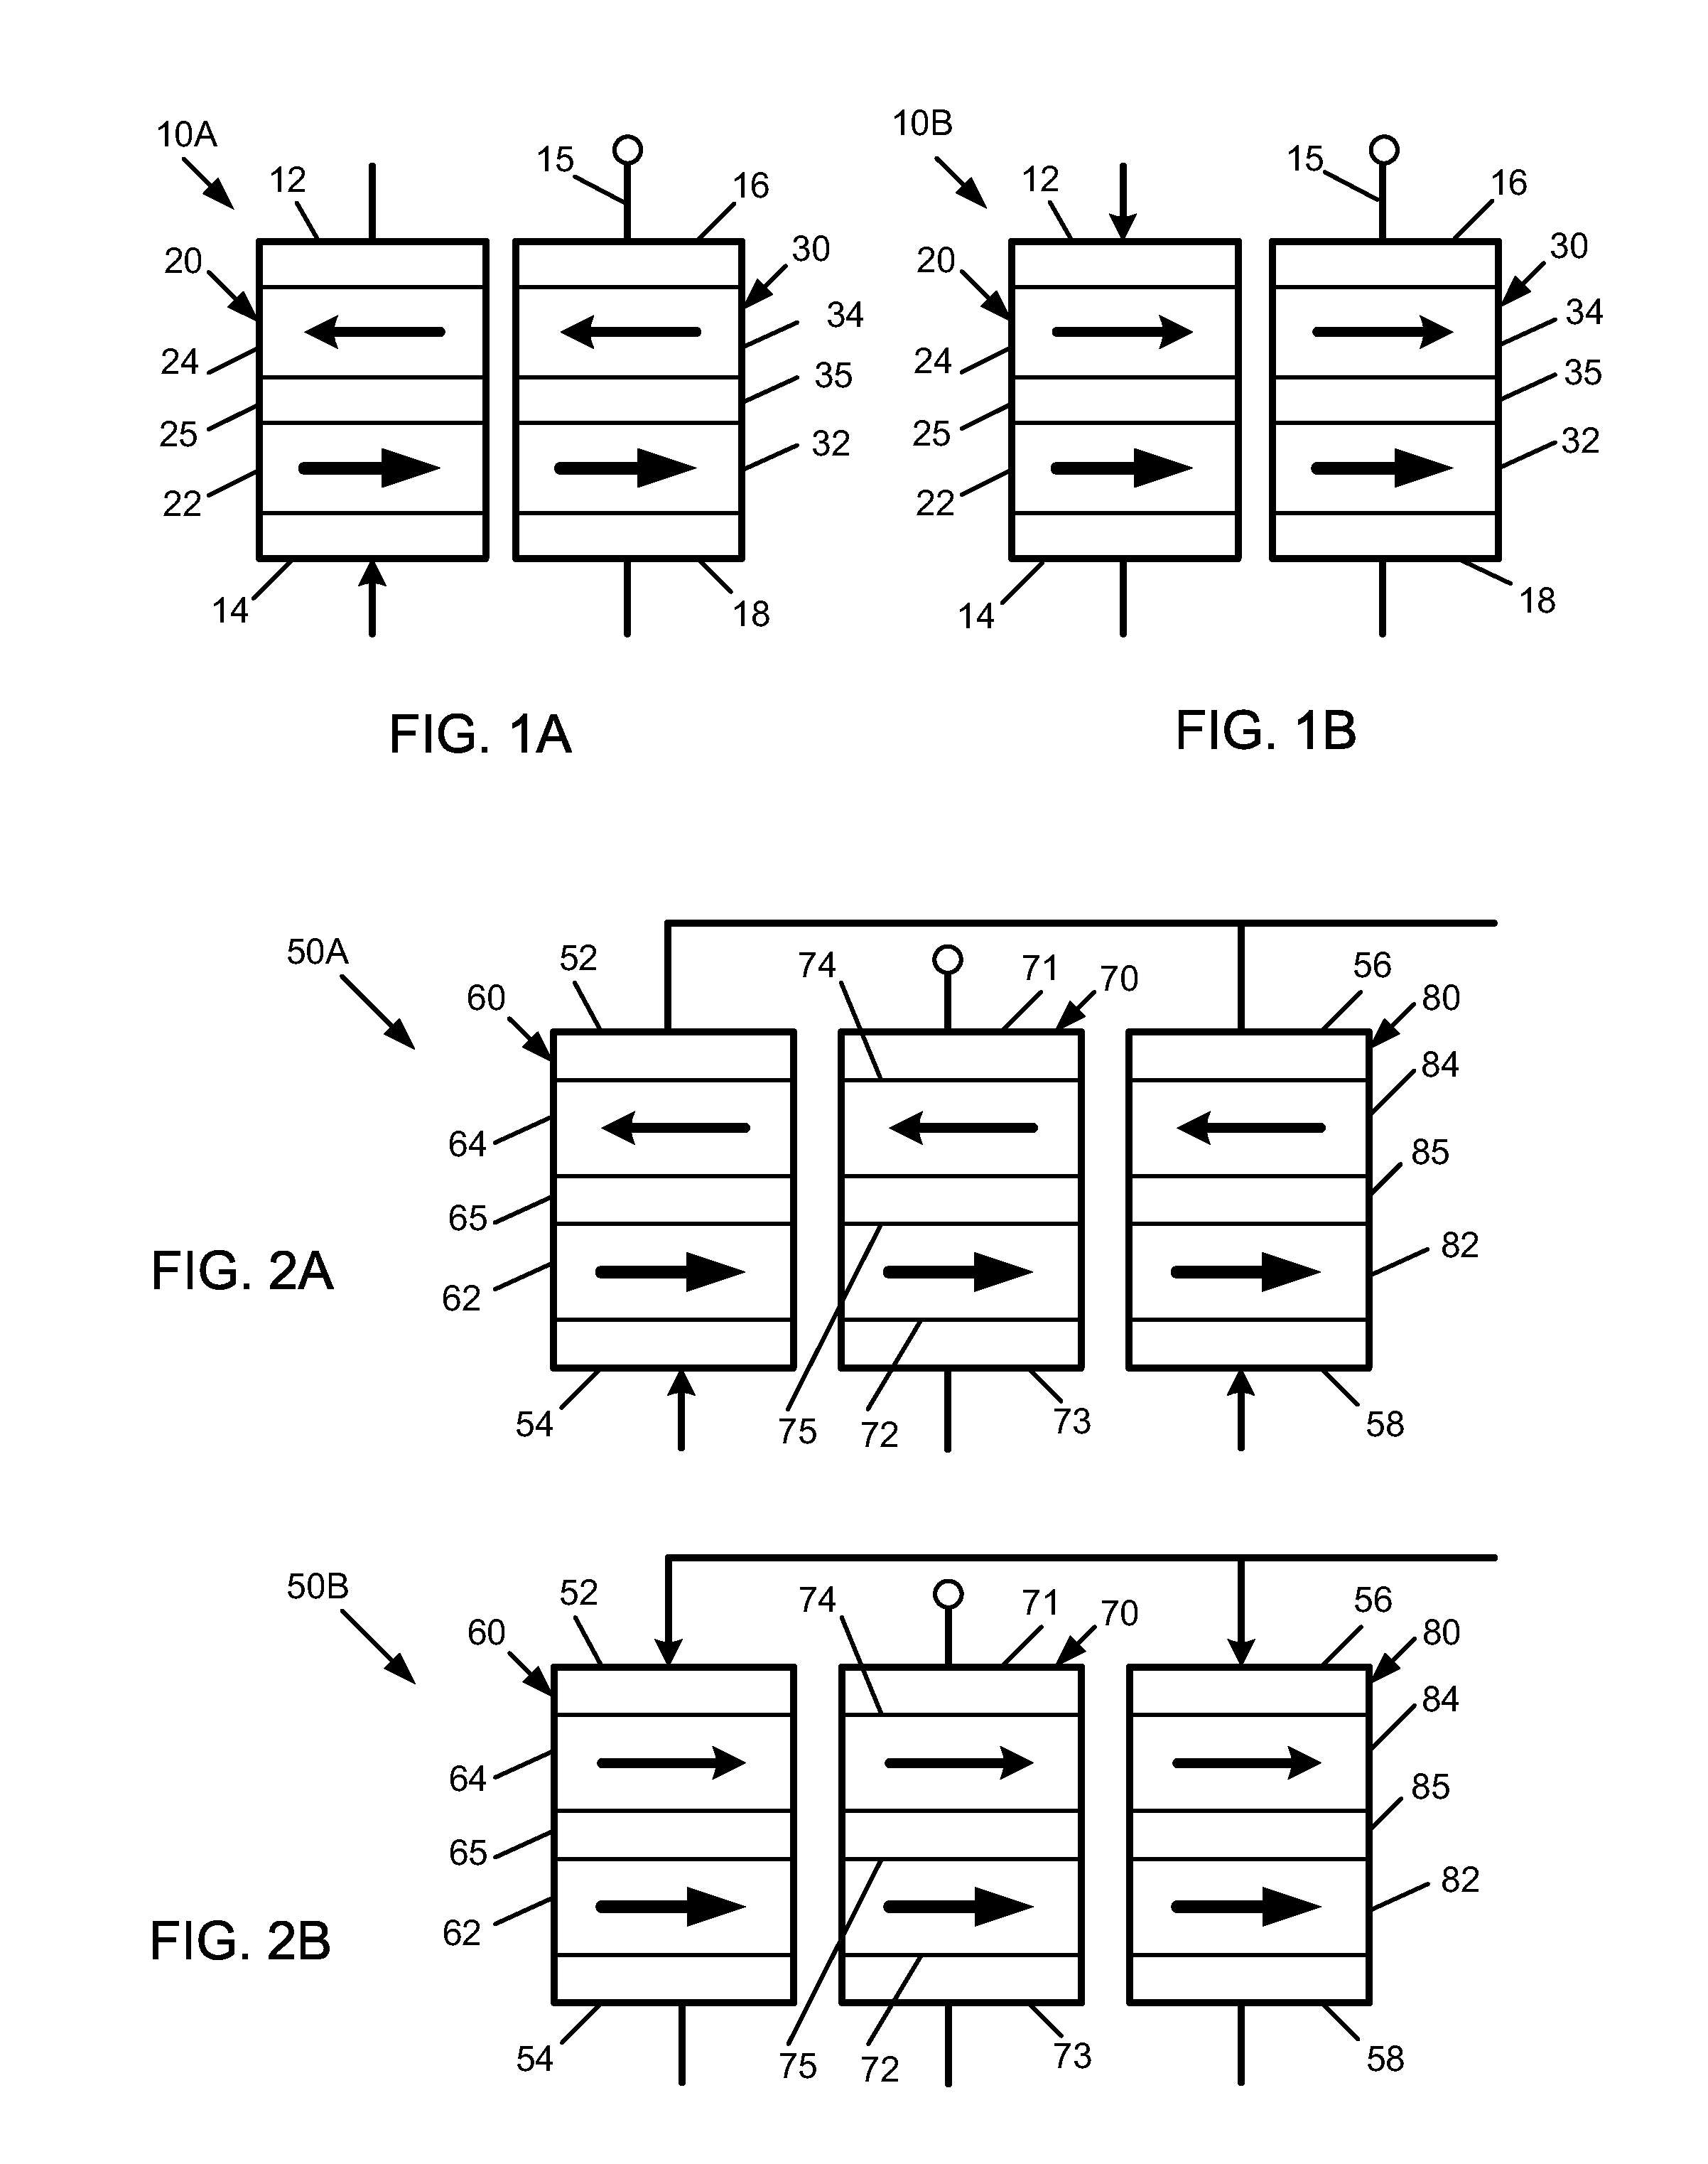 Non-volatile programmable logic gates and adders